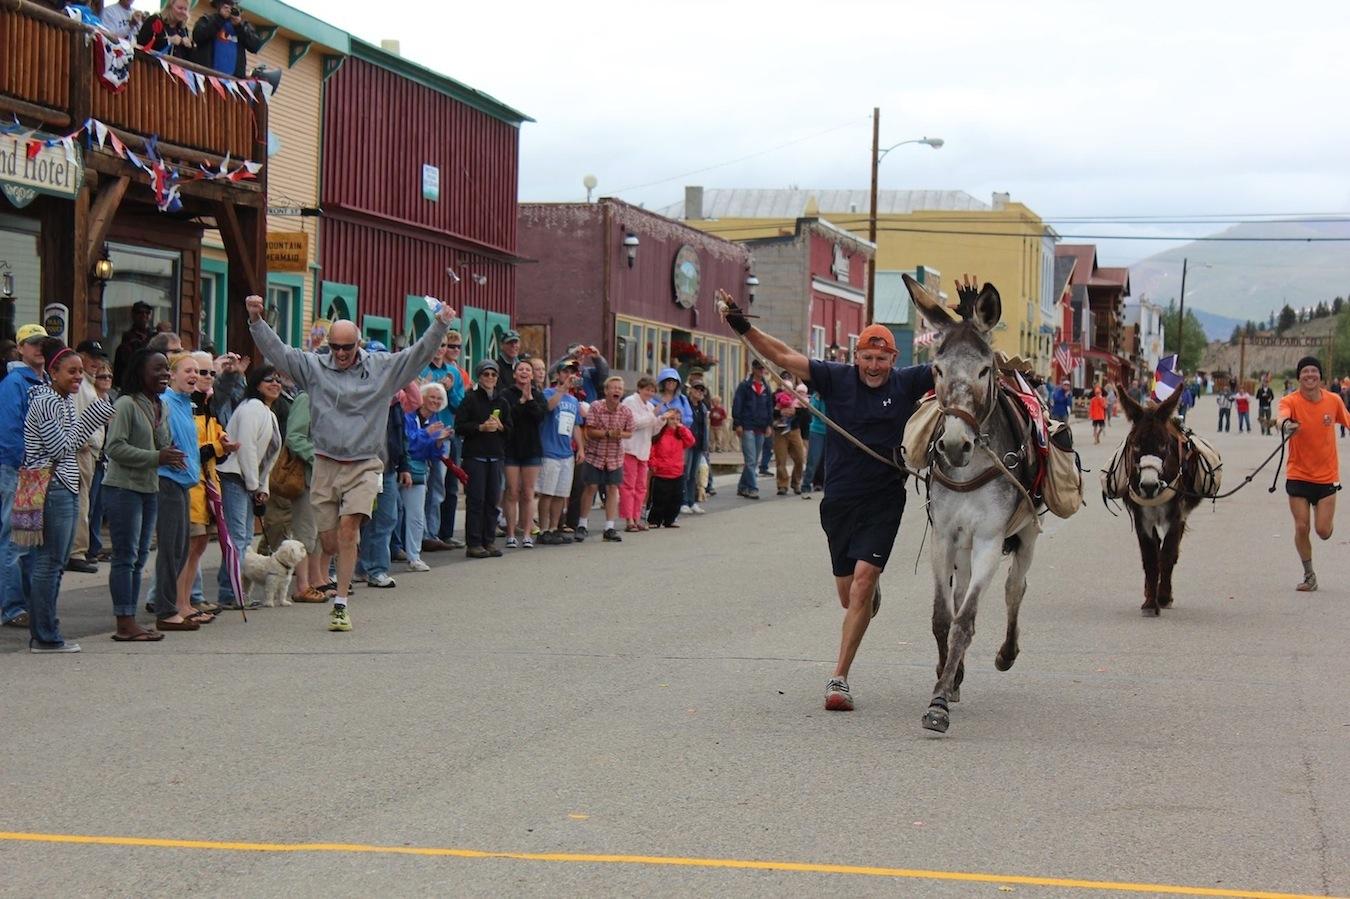 Hal Walter crosses the finish line with his burro Full Tilt Boogie to win 28.6-mile World Championship Pack Burro Racing Championship in Fairplay in 2013.